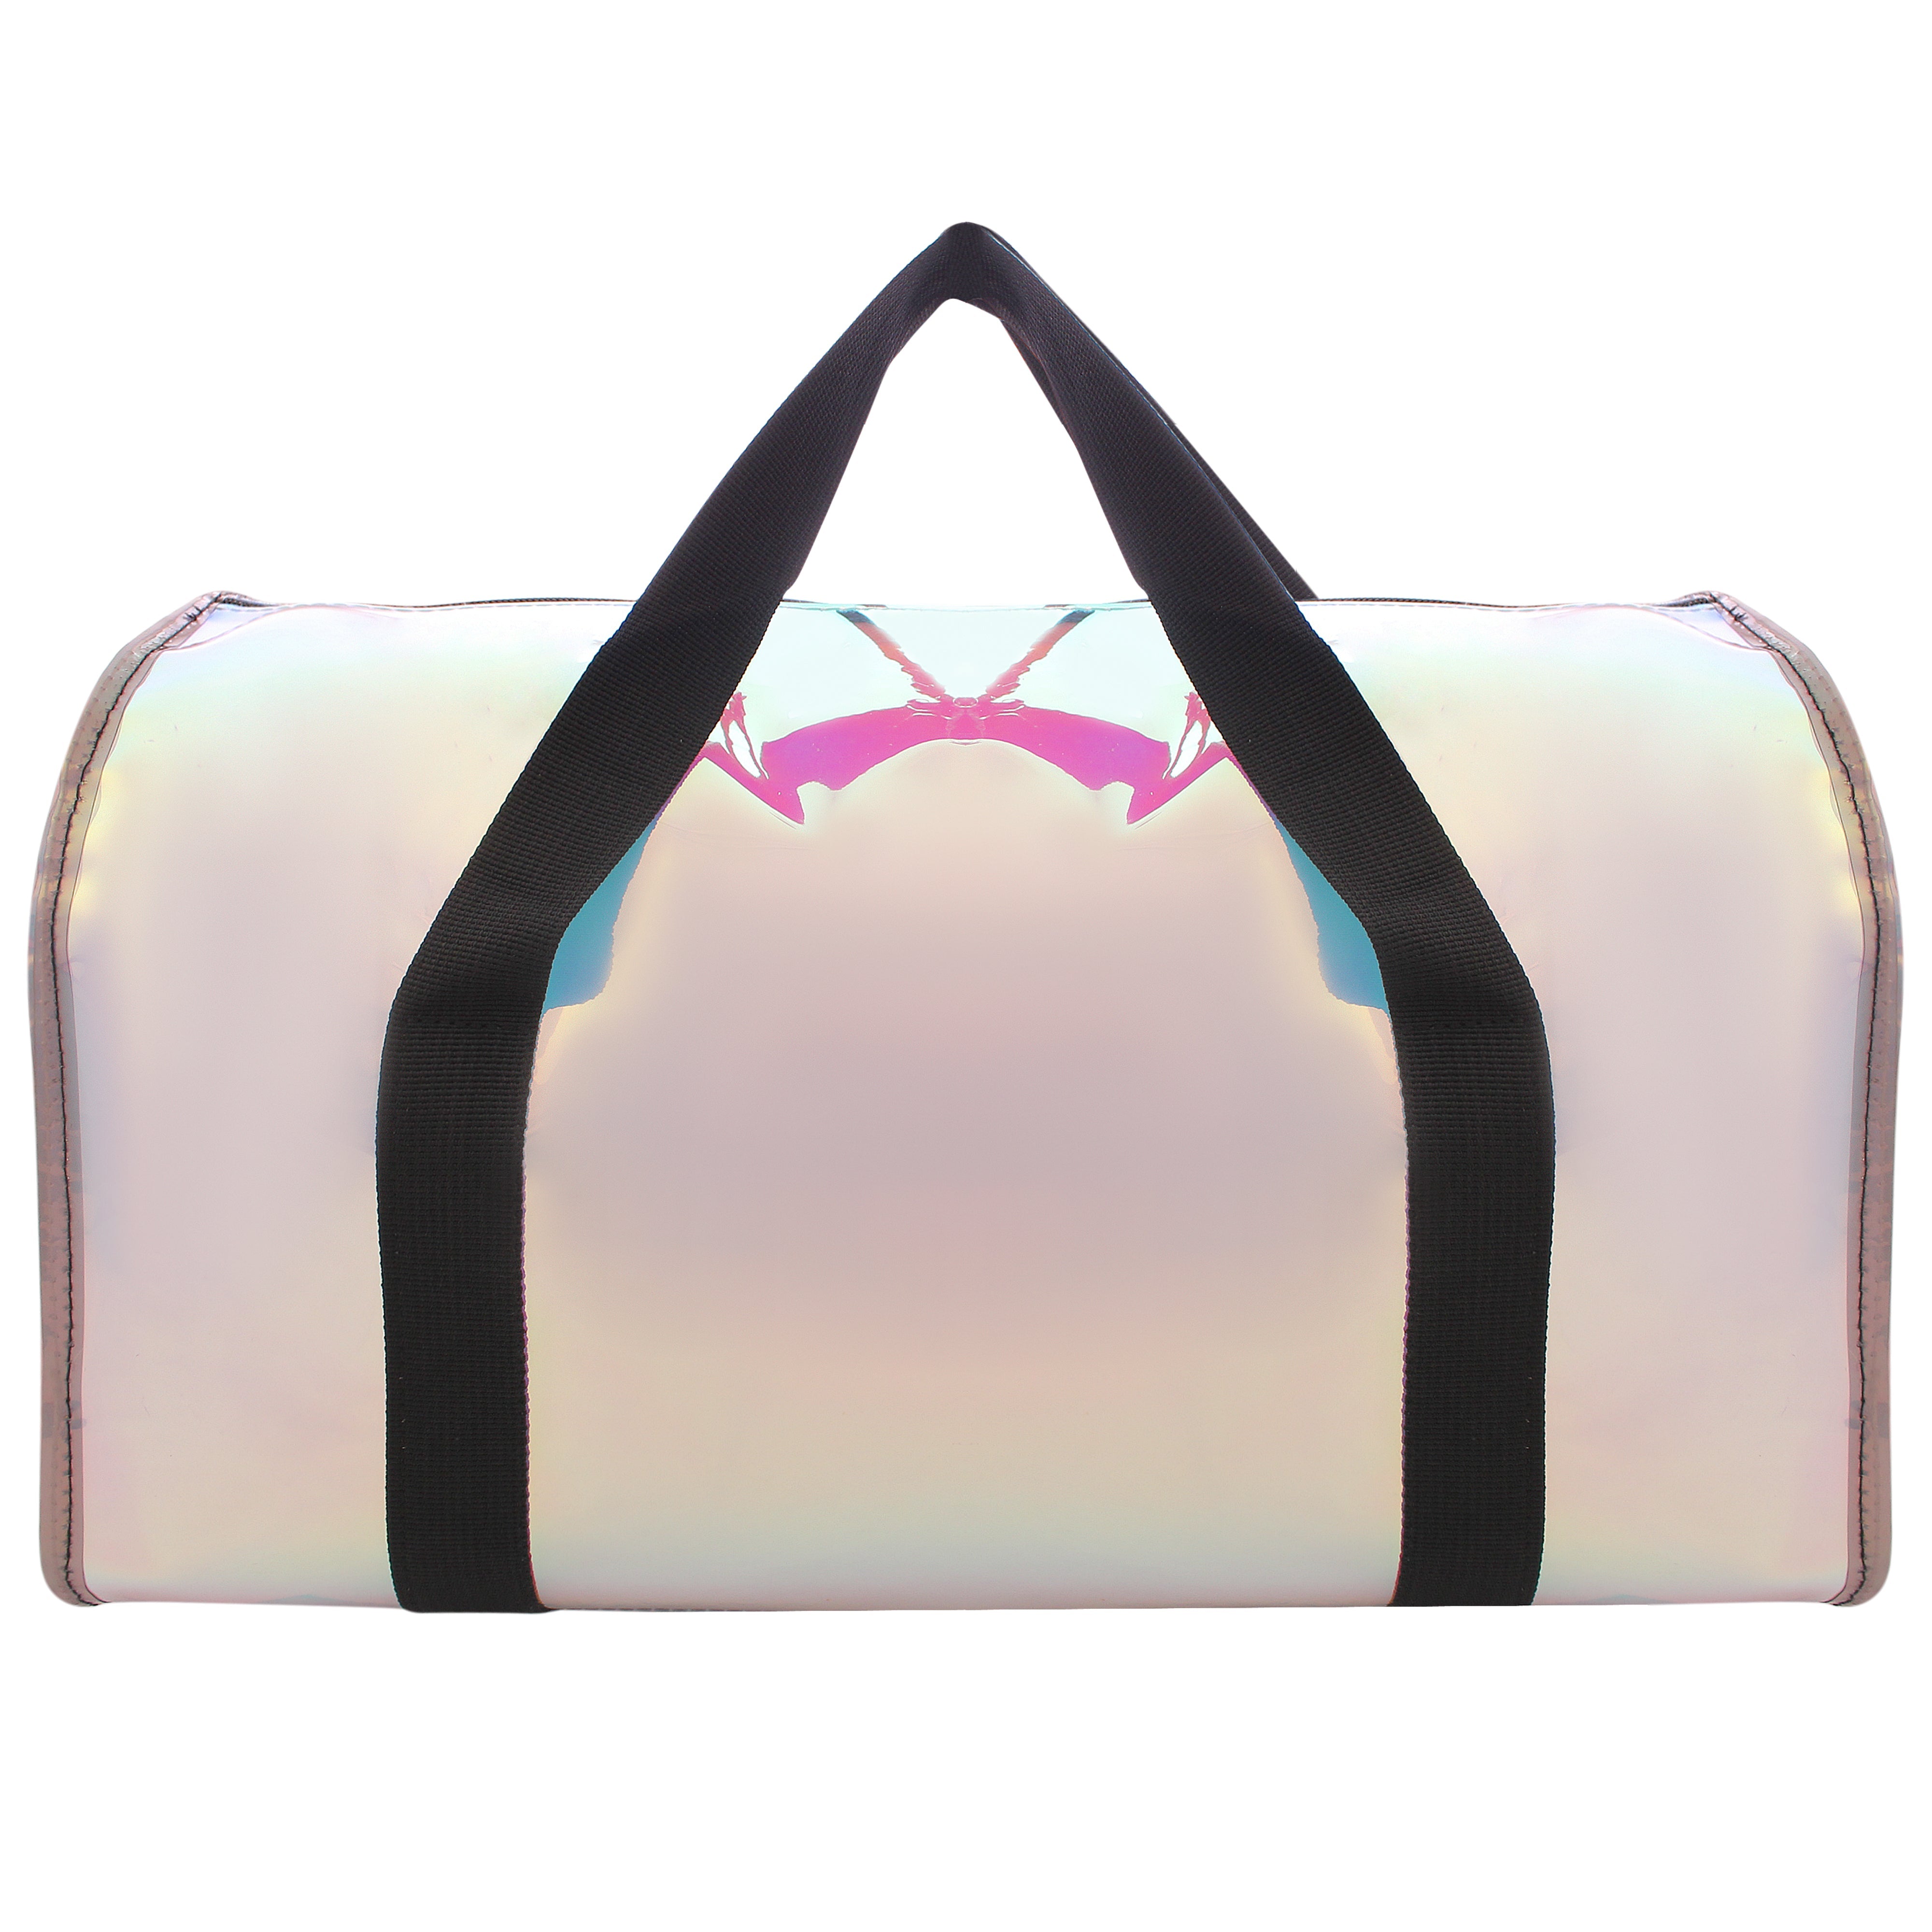 HL Shiny Classic Duffle Bag Black With Personalization